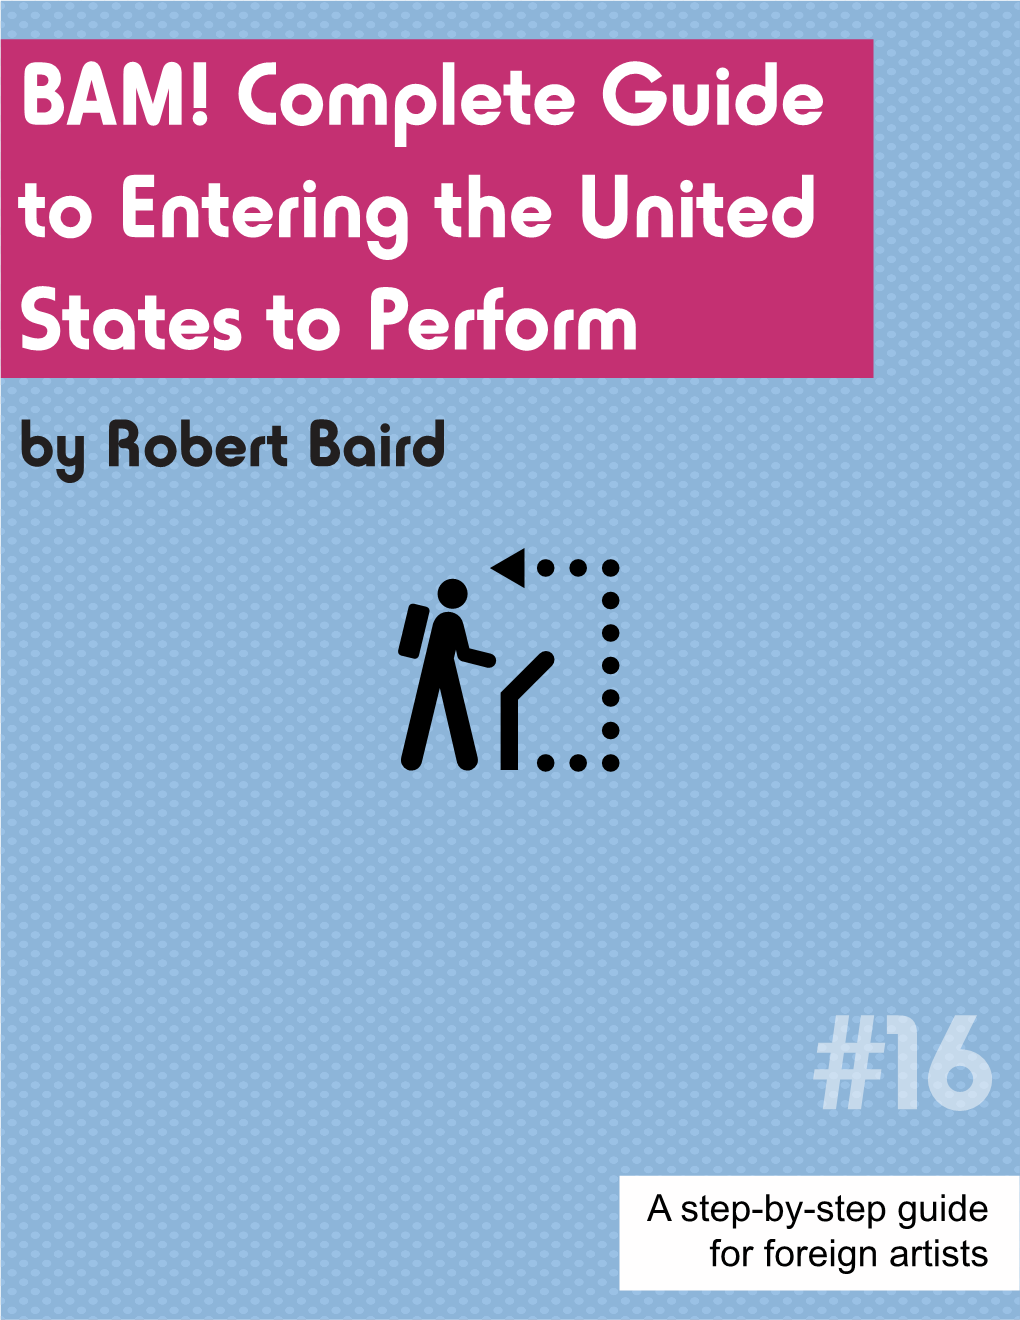 BAM! Complete Guide to Entering the United States to Perform by Robert Baird